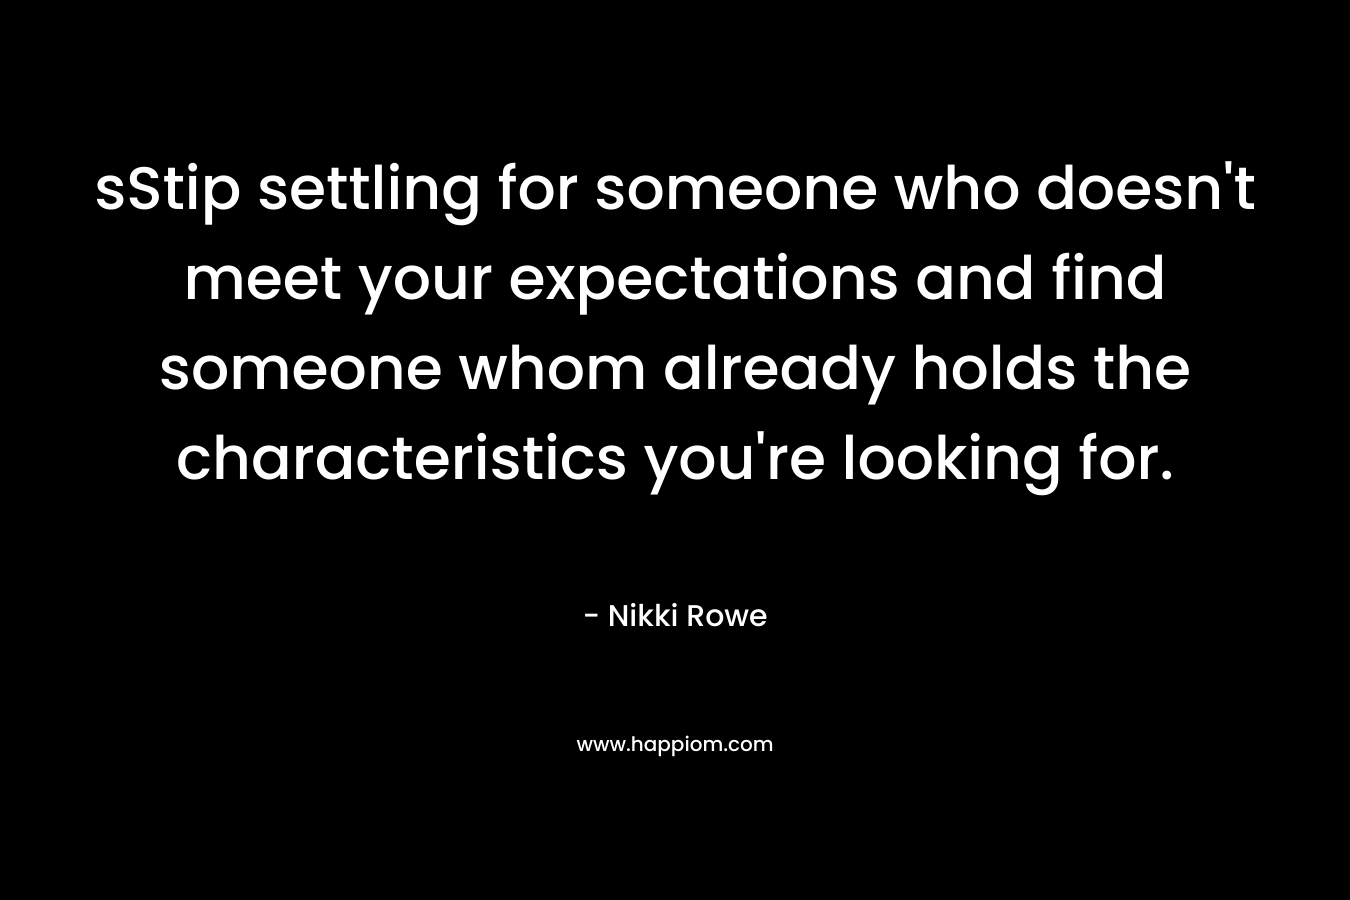 sStip settling for someone who doesn't meet your expectations and find someone whom already holds the characteristics you're looking for.